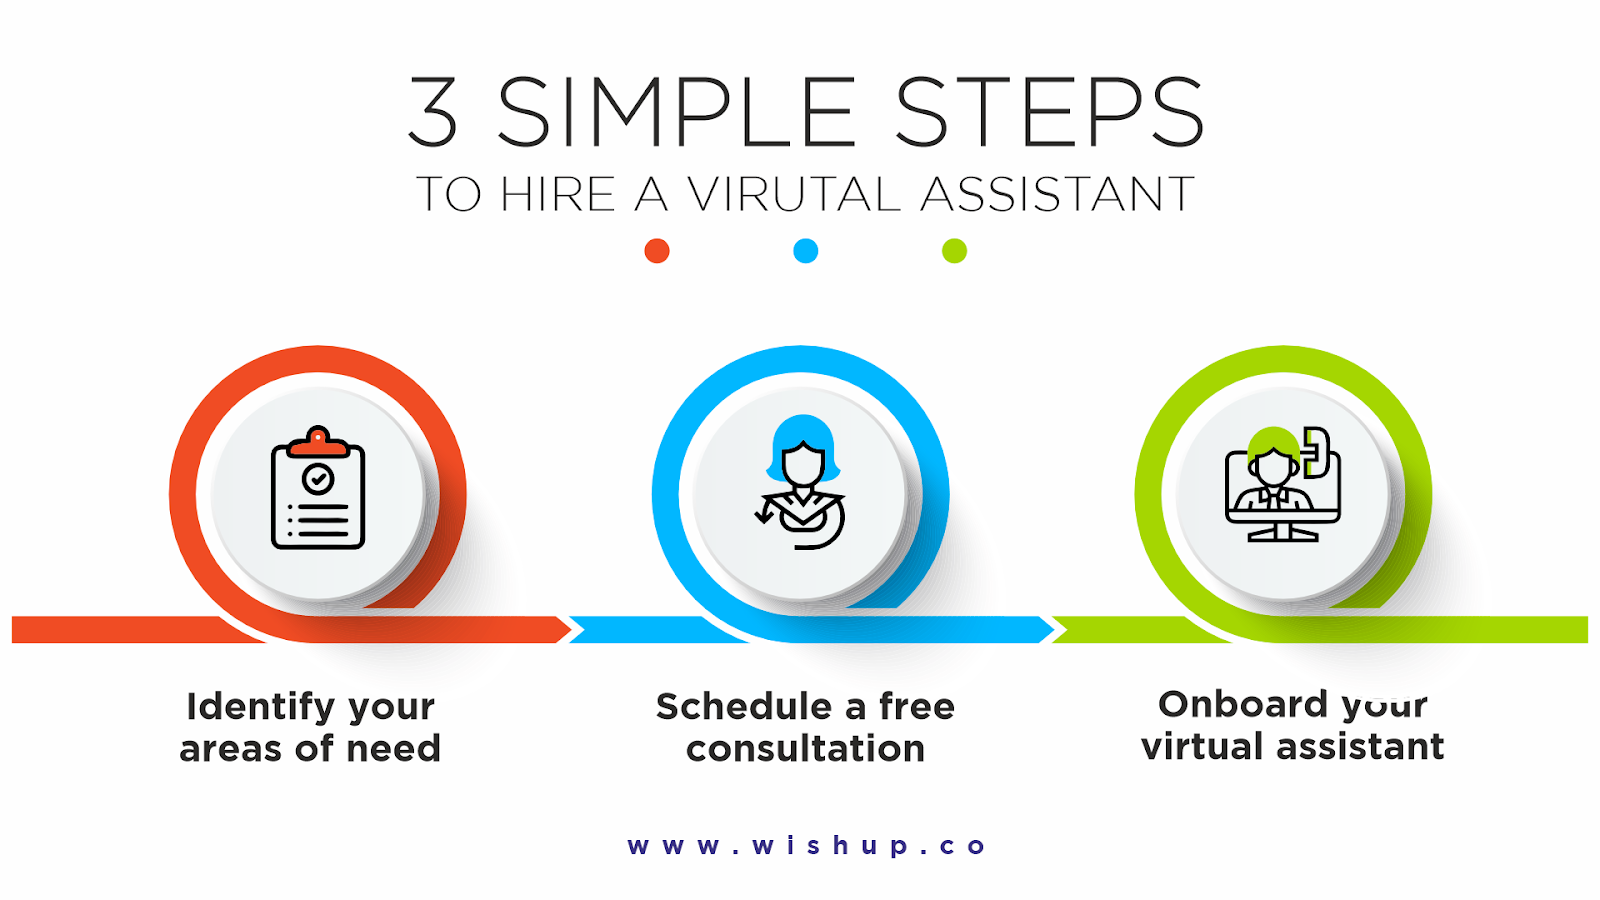 Hire a virtual assistant through Wishup in three simple steps